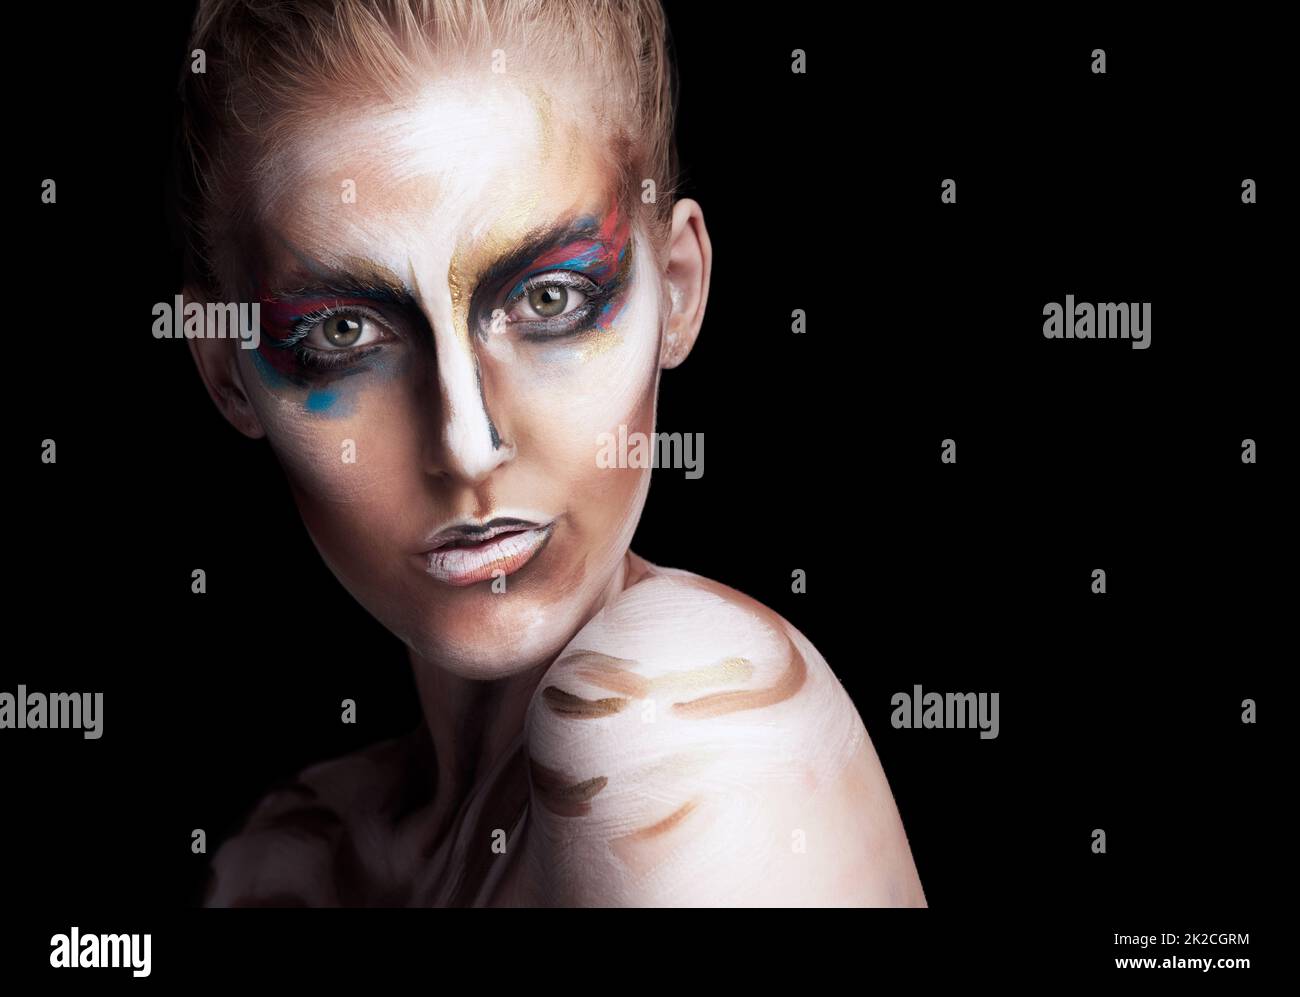 Confident in colour. Studio portrait of a young woman posing with paint on her face isolated on black. Stock Photo